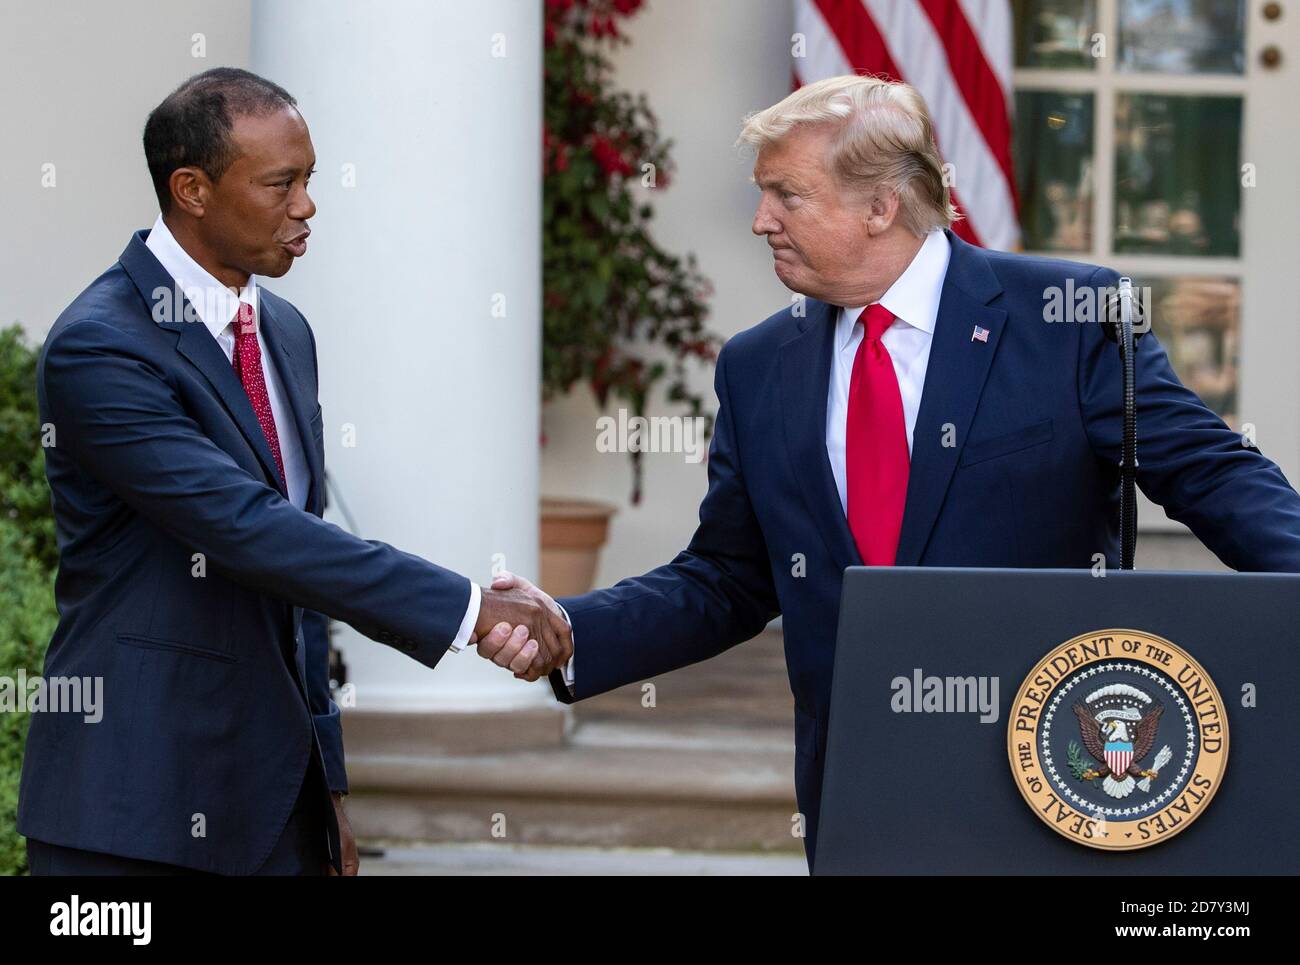 U.S. President Donald Trump shakes hands with Golfer Tiger Woods before presenting Woods with the Presidential Medal of Freedom in the Rose Garden of the White House in Washington, D.C. on Monday, May 6, 2019. The Presidential Medal of Freedom is the highest honor a U.S. President can bestow on a civilian. Credit: Alex Edelman/The Photo Access Stock Photo